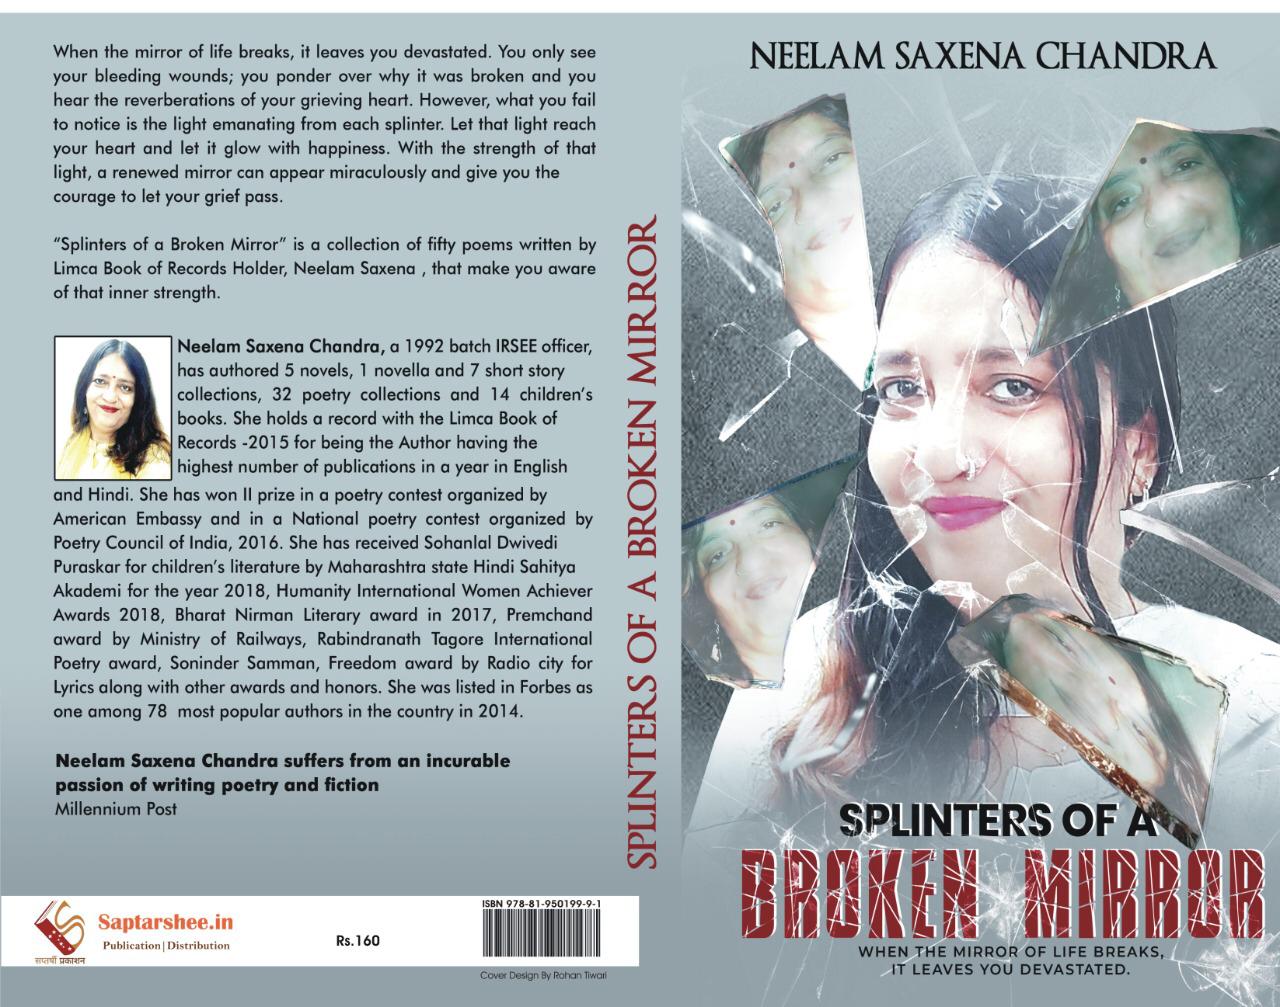 Making you aware of your inner strength through Poems - Neelam Saxena Chandra